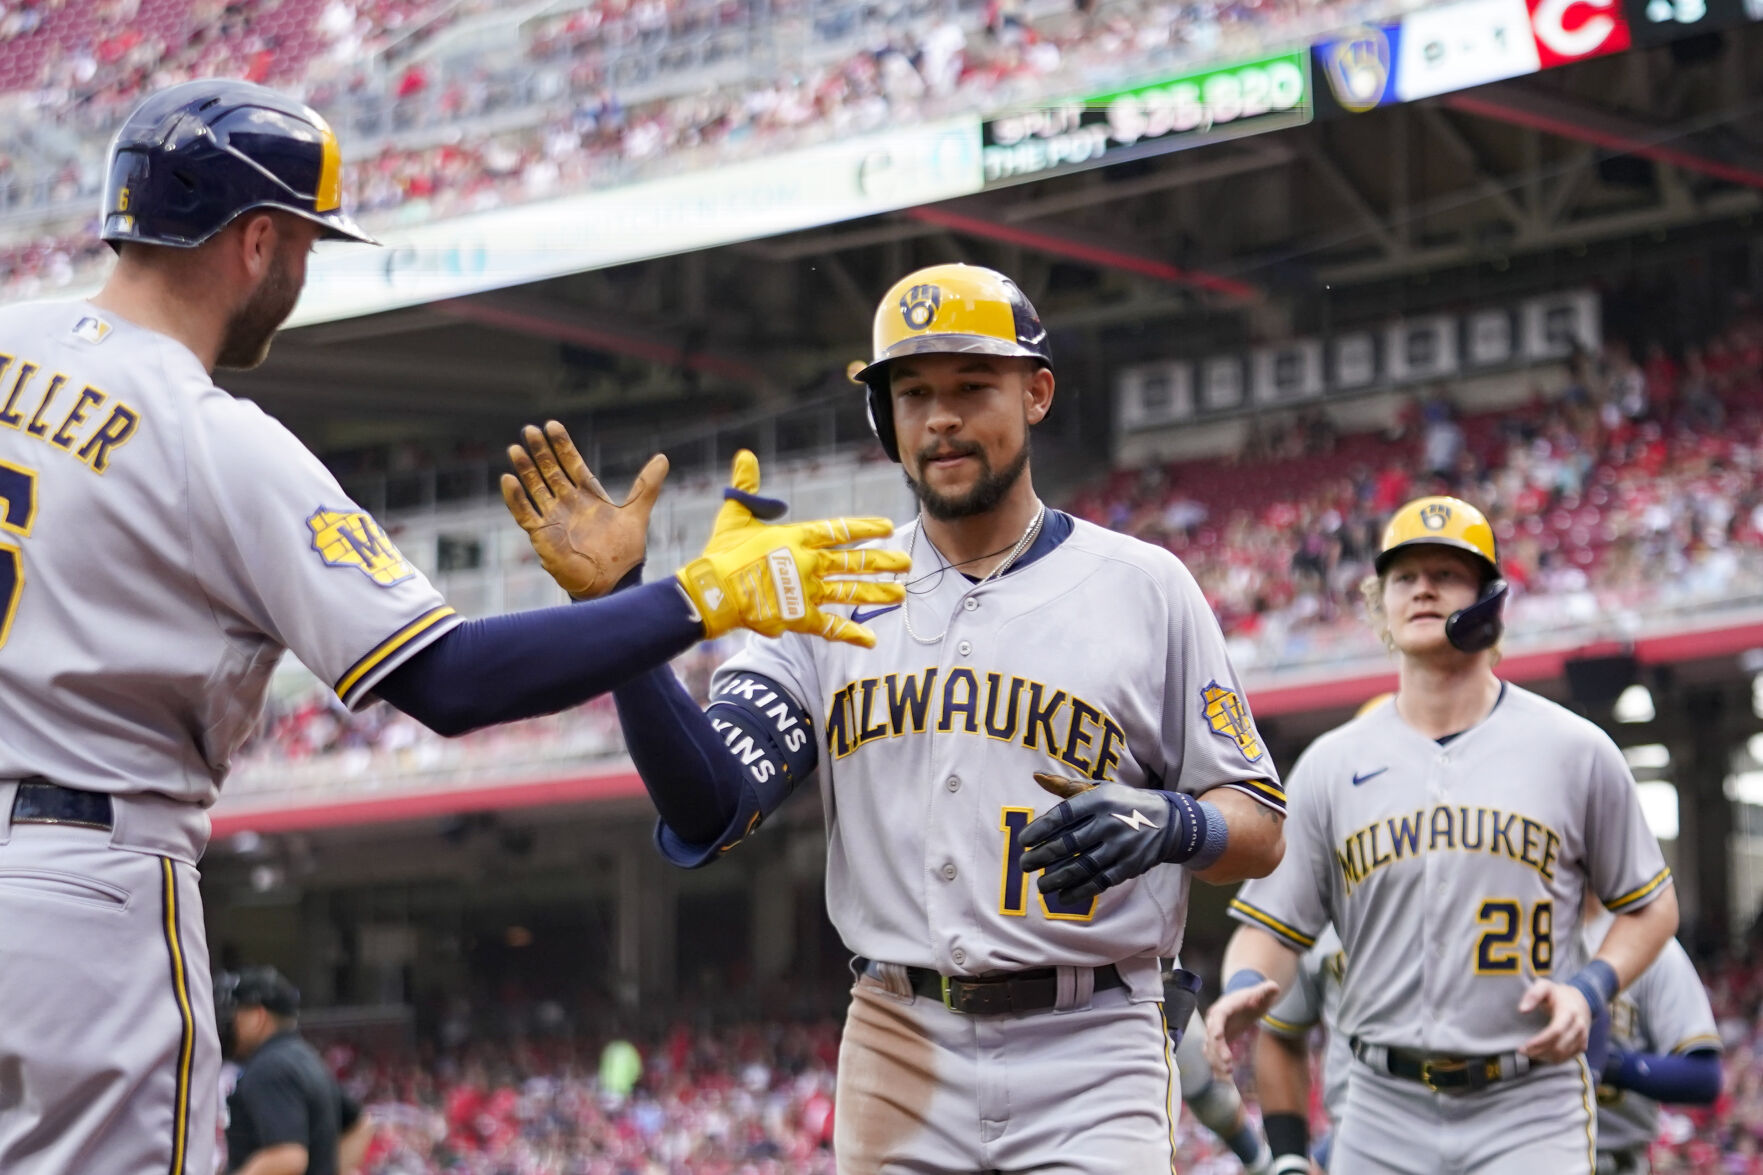 Brewers score 10 runs in first 3 innings, hold on to beat Reds